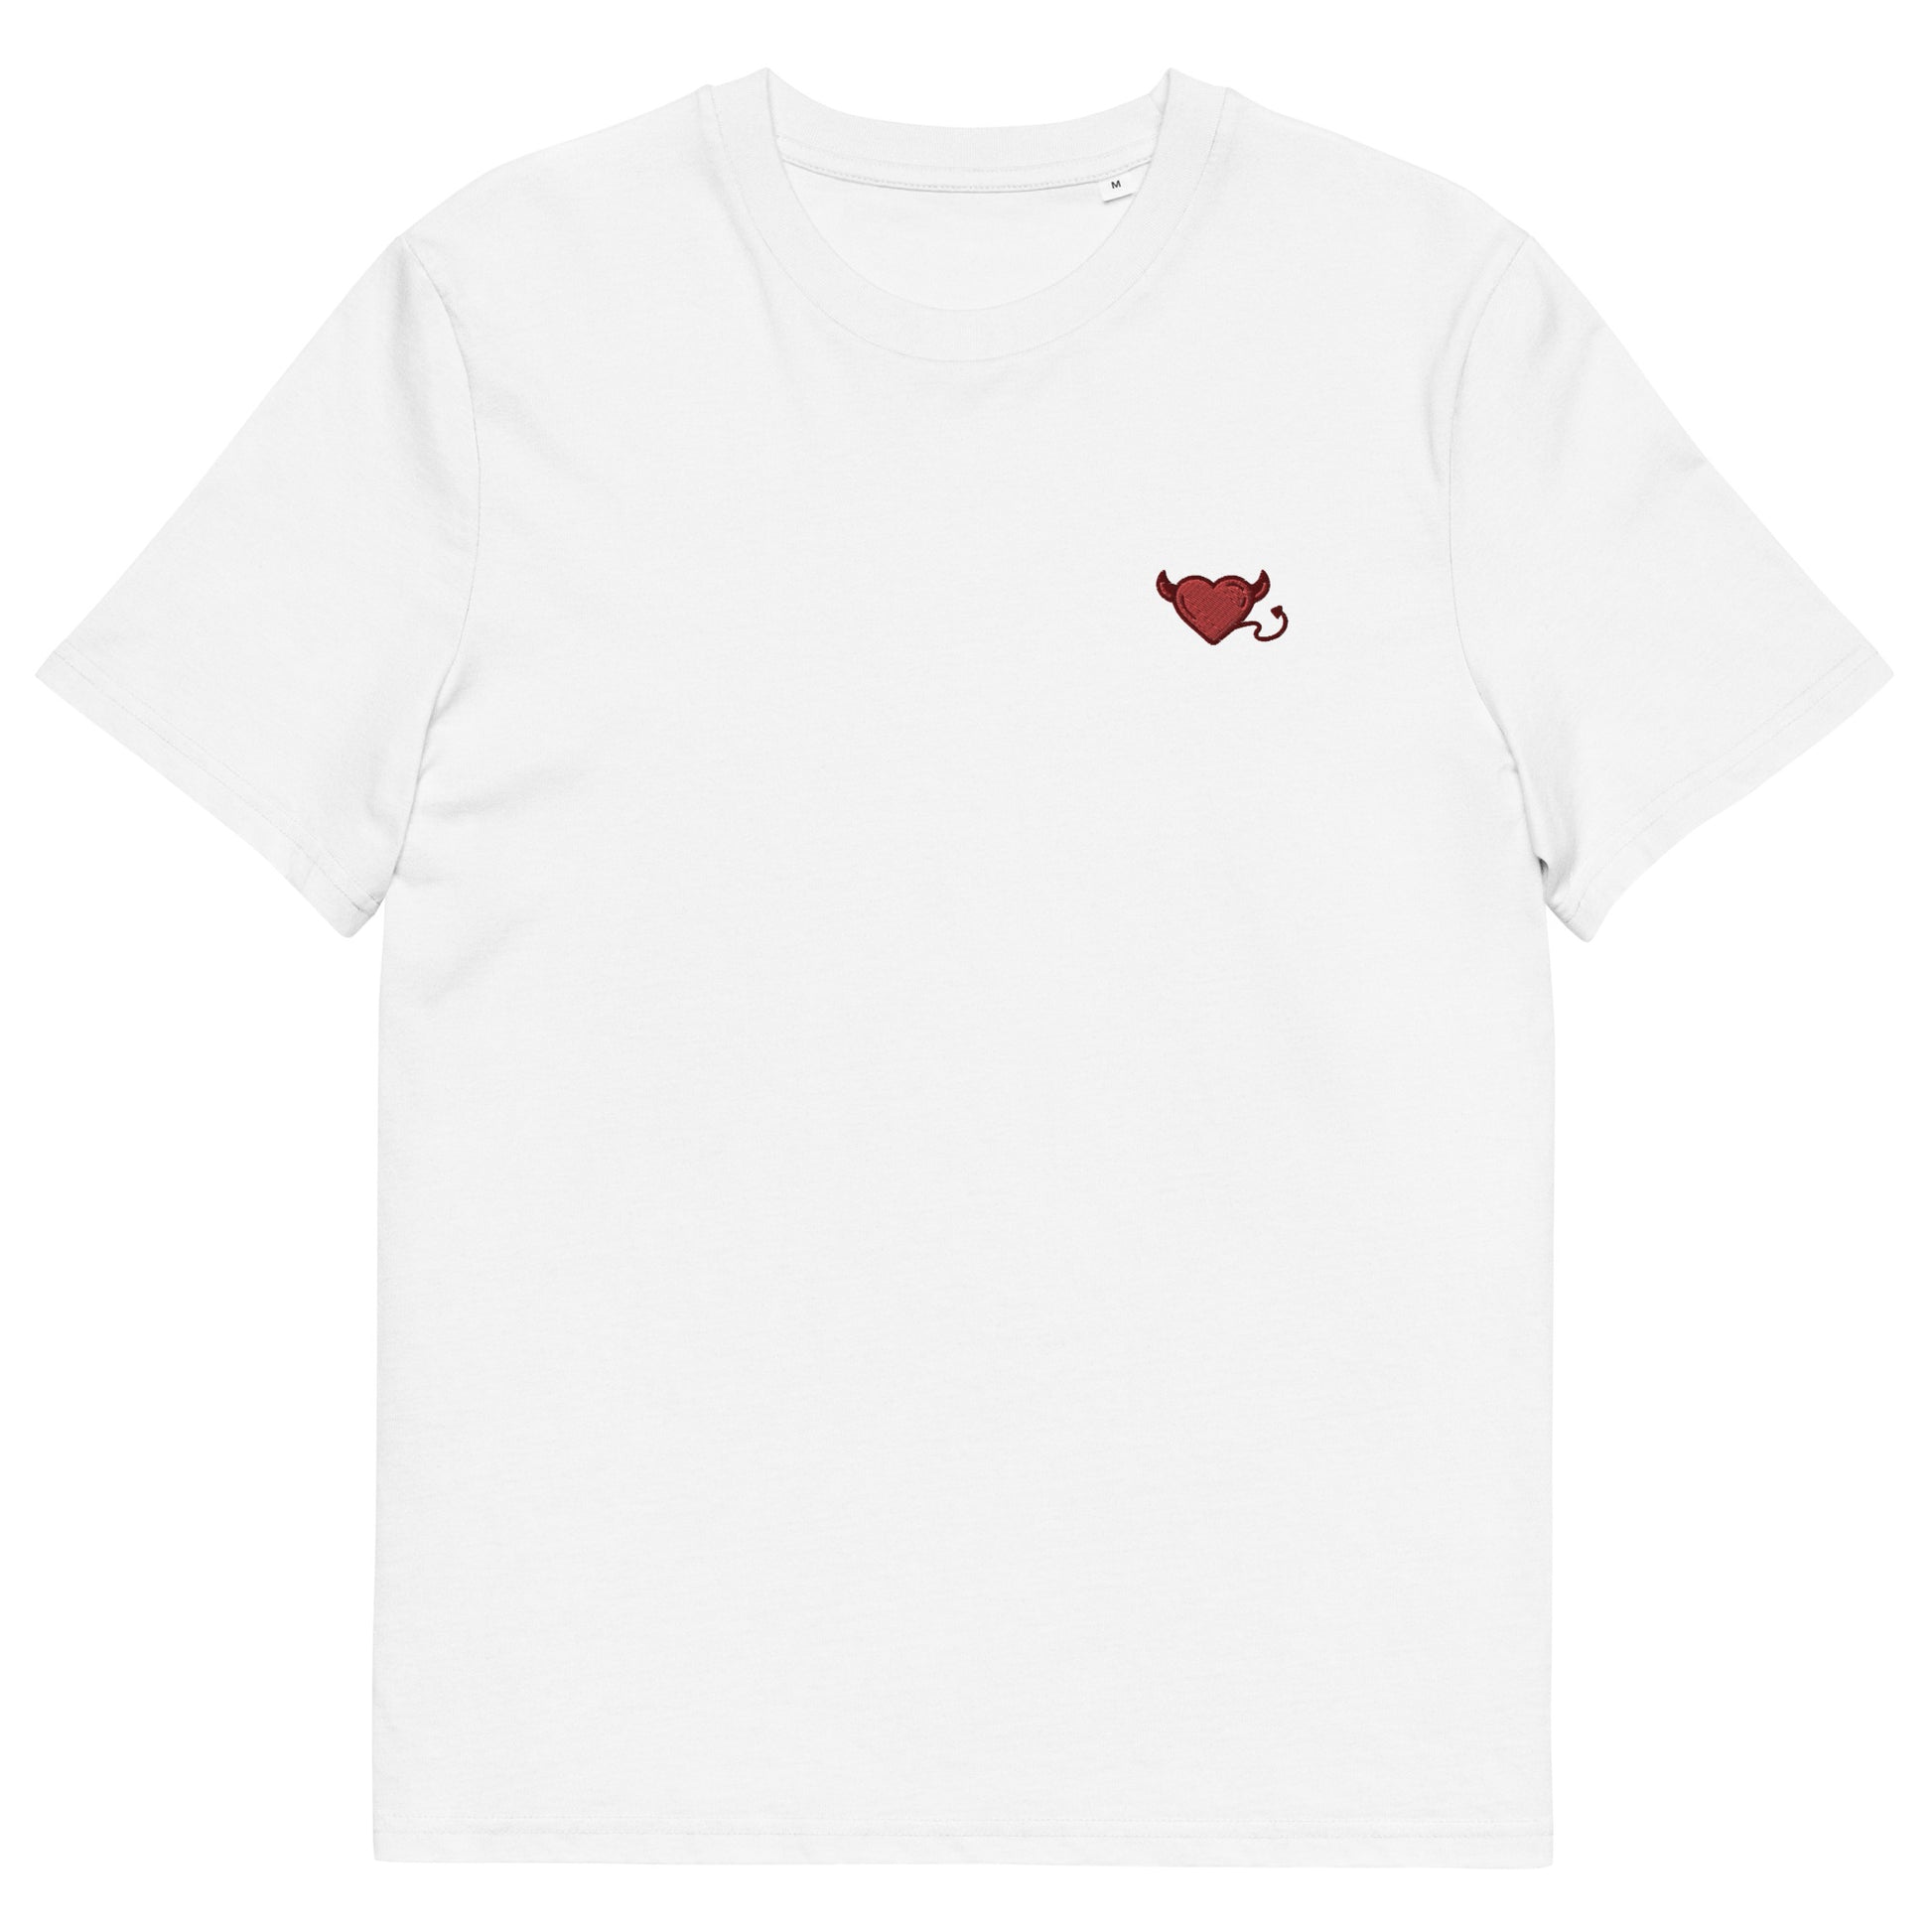 Fitted white t-shirt with a red devil's heart embroidered on the left chest. 